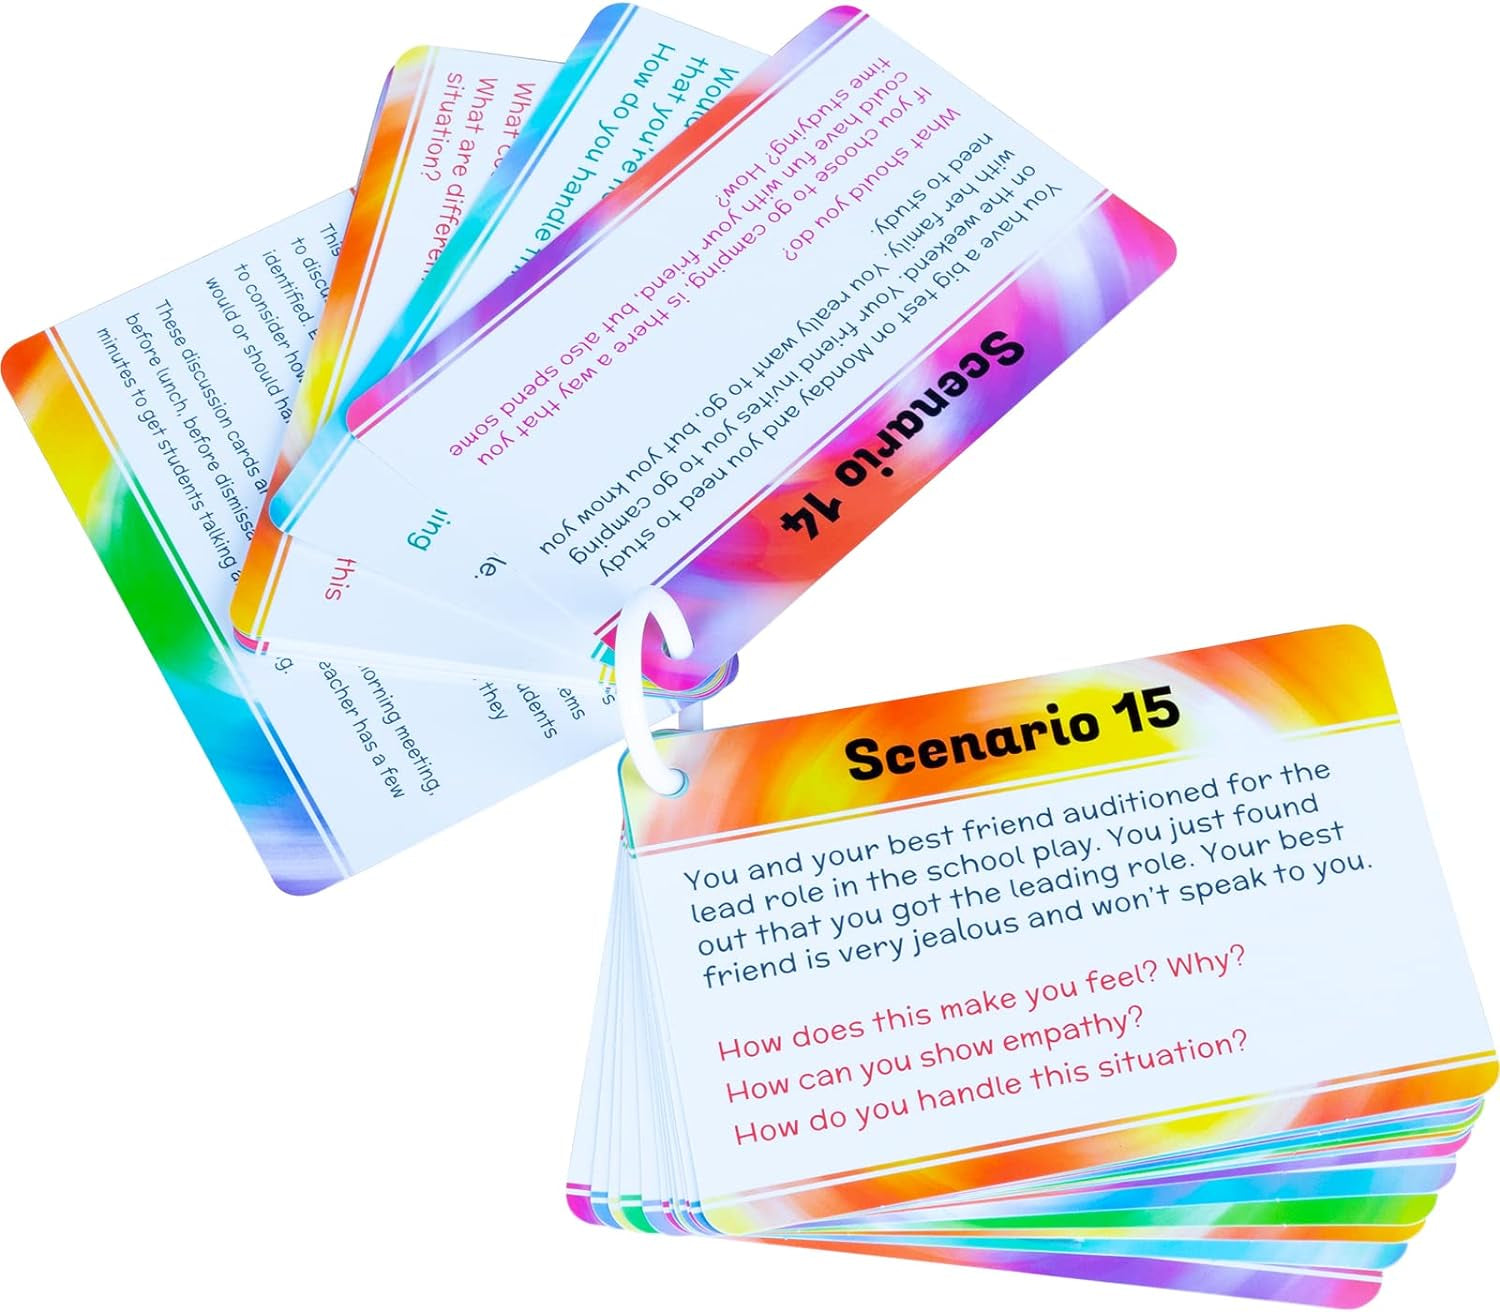 Social Skills Discussion Cards - Set of 20 Conversation Cards for Kids - Social Emotional Learning Activities for Understanding Social Rules and Developing Essential Social Skills